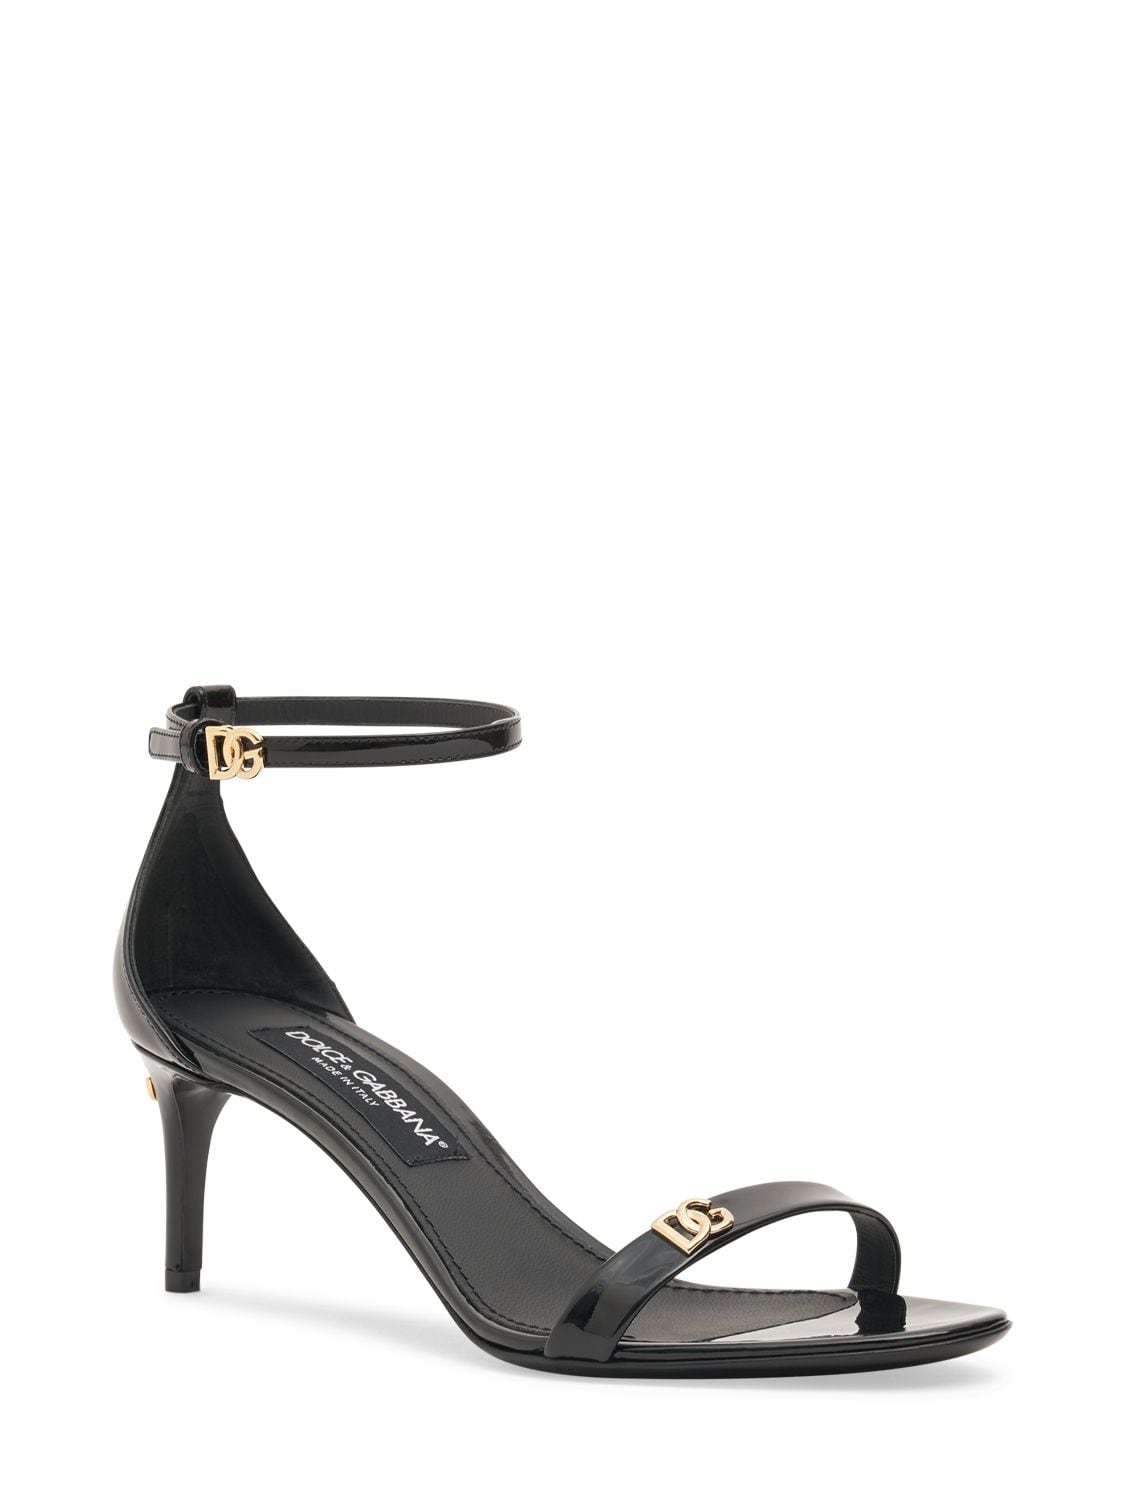 Shop Dolce & Gabbana 60mm Keira Patent Leather Sandals In Black